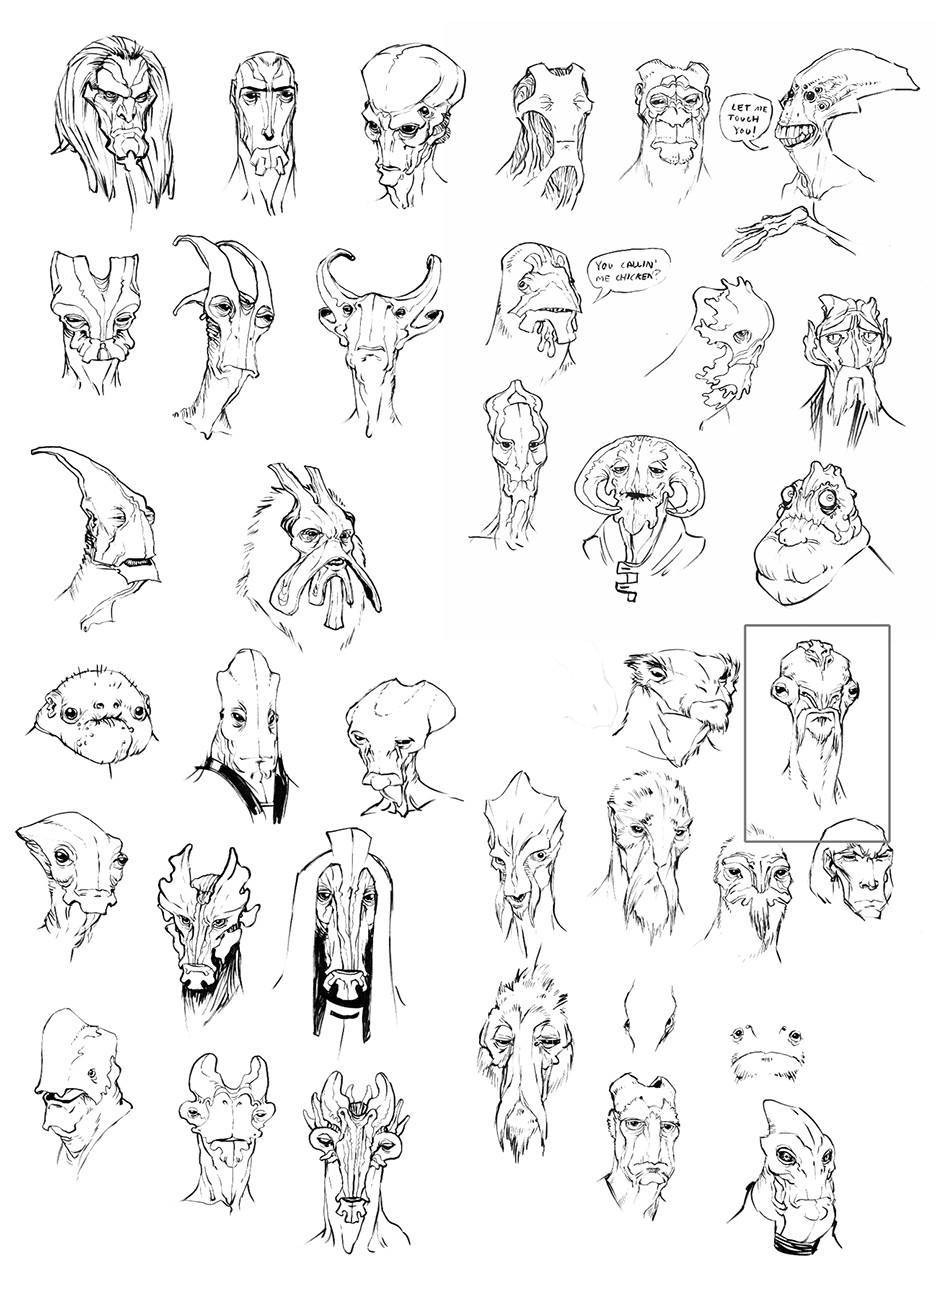 in the early days, I would sketch pages of these for Derek to chose from